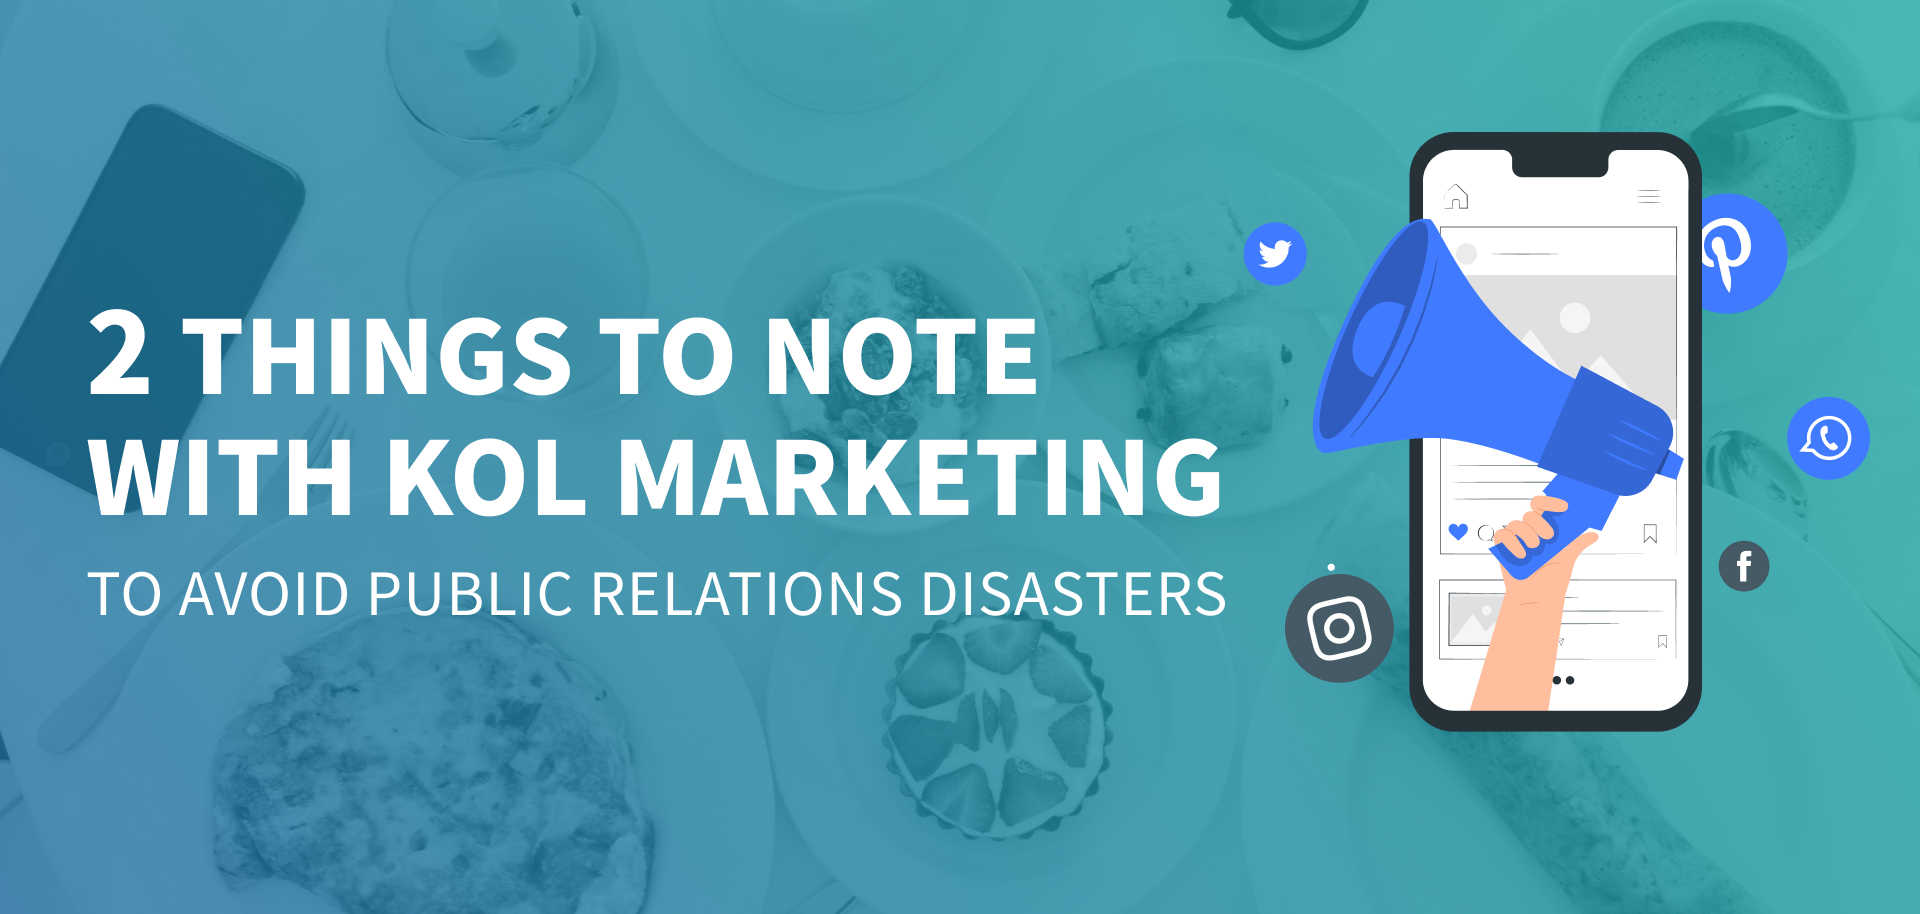 2 Important Notes on KOL marketing (To Avoid Public Relations Disasters)